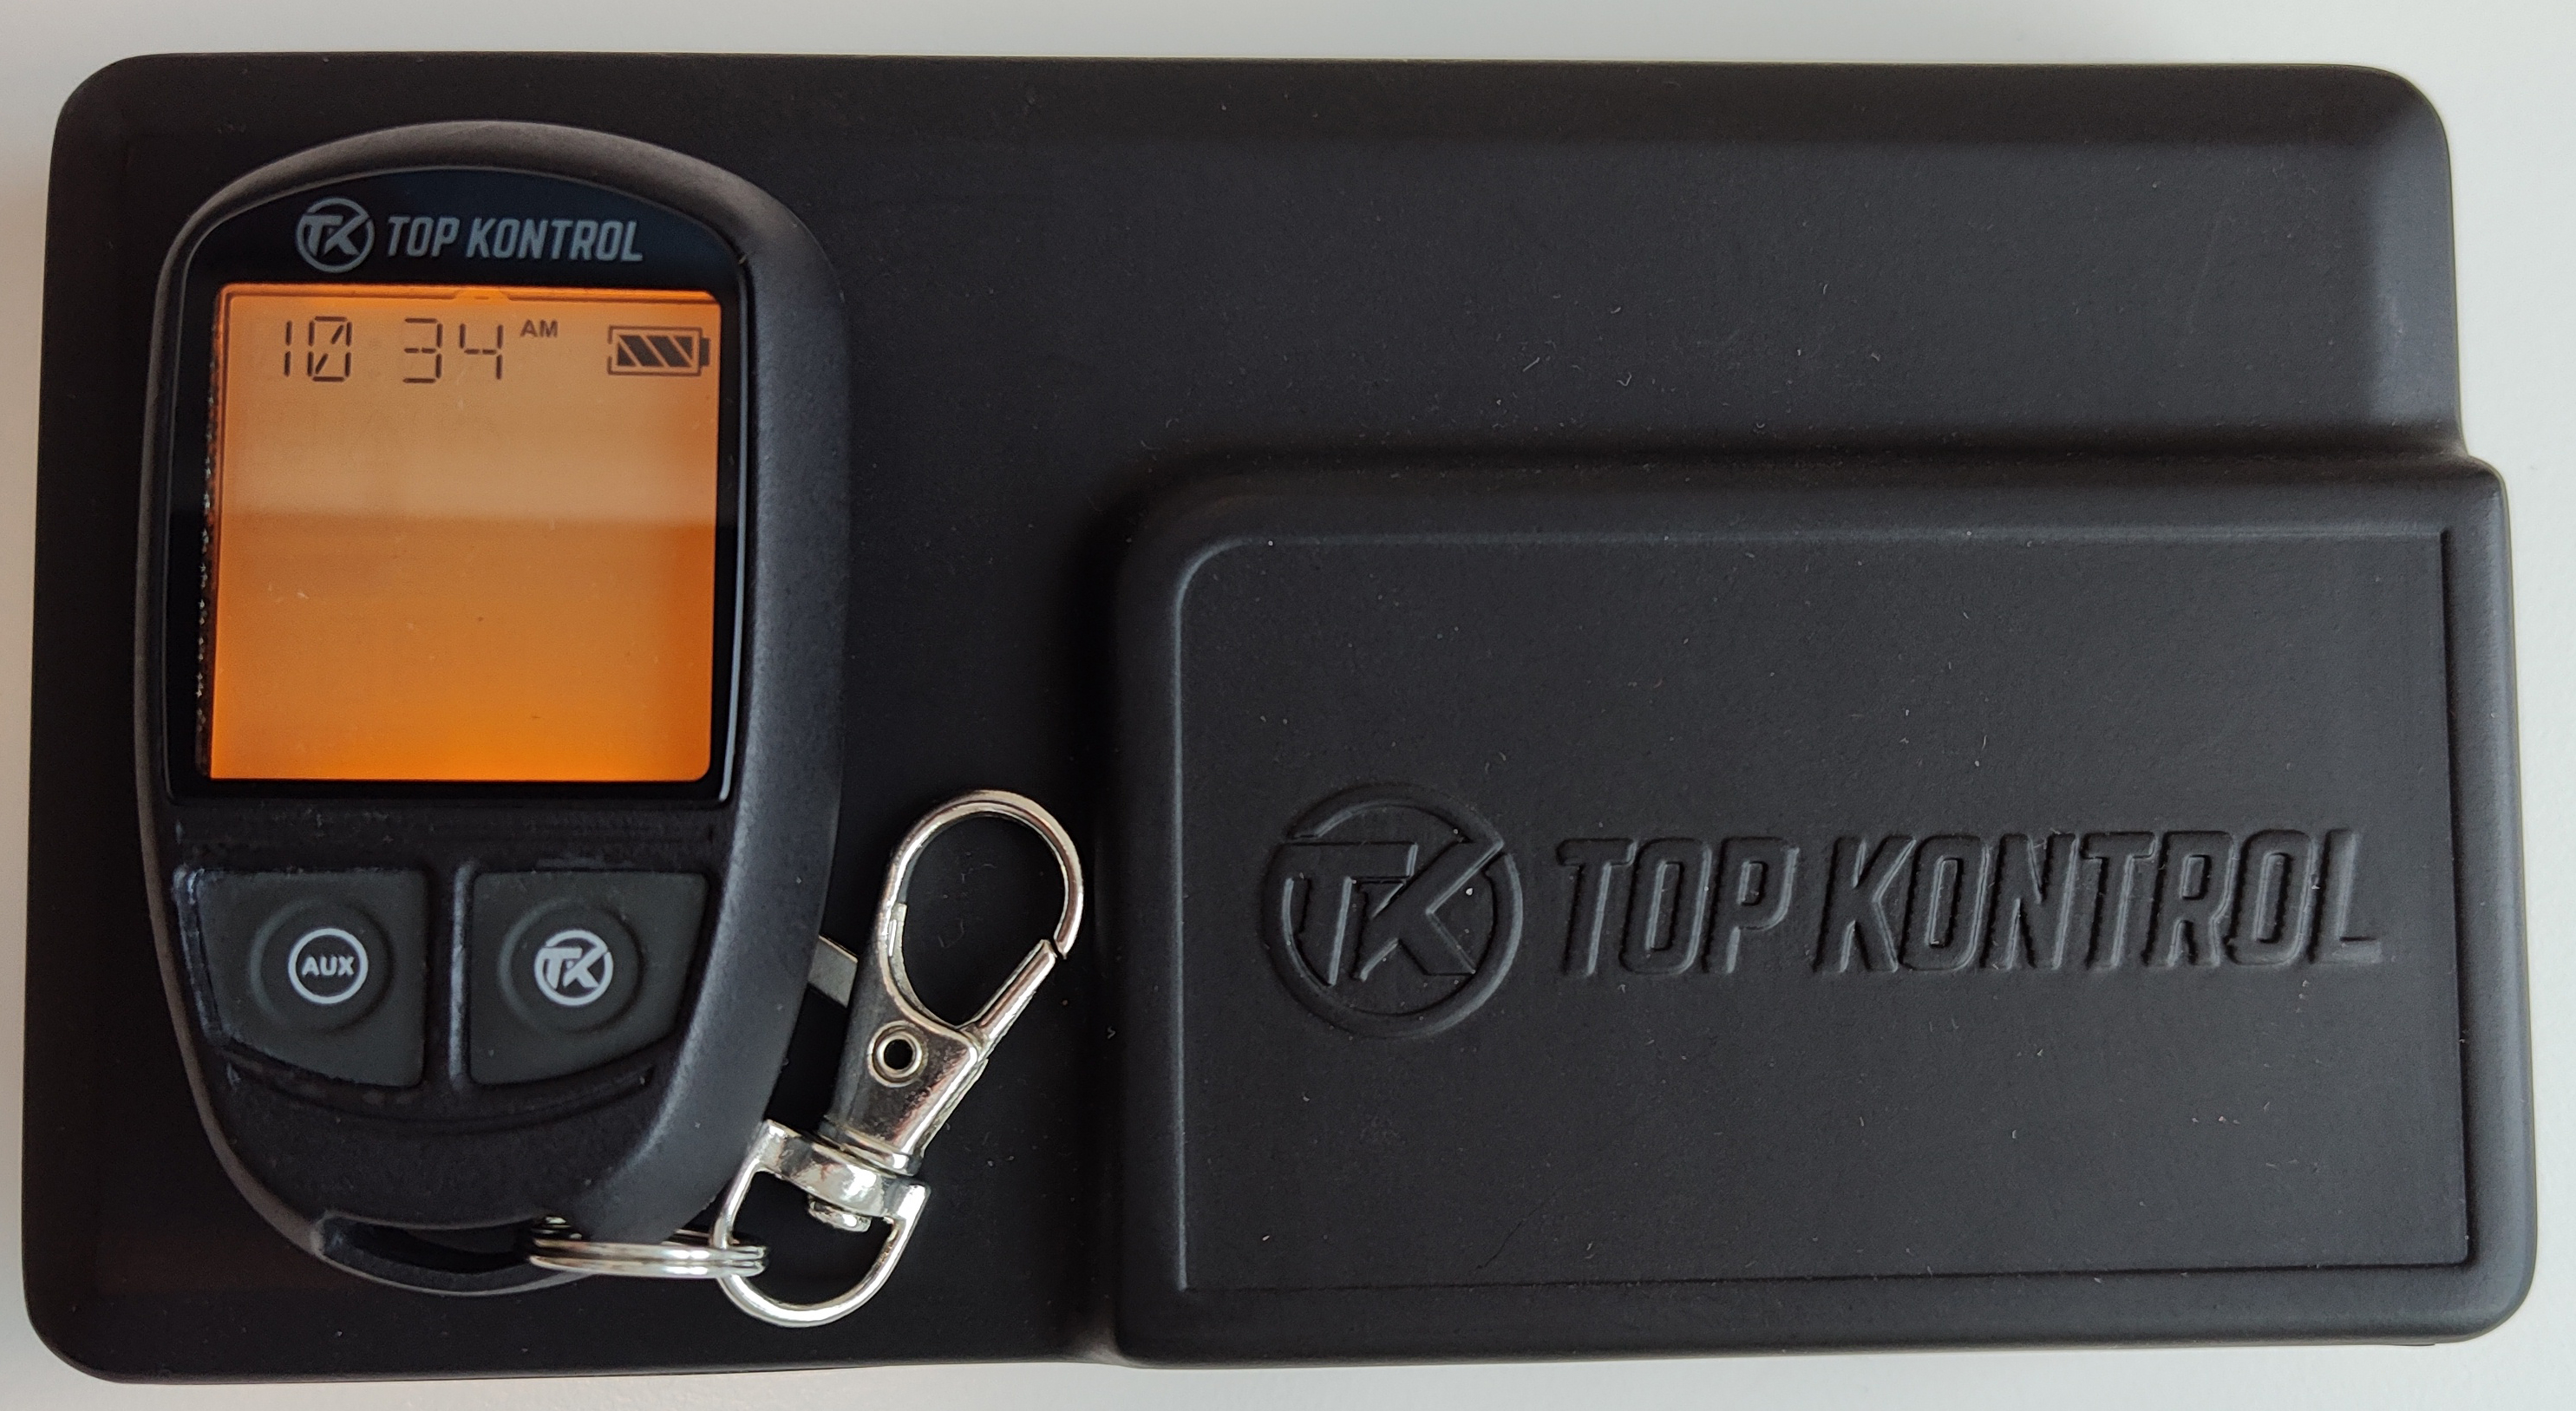 Next Generation Top Kontrol (Prototype A) with Programmable FOB